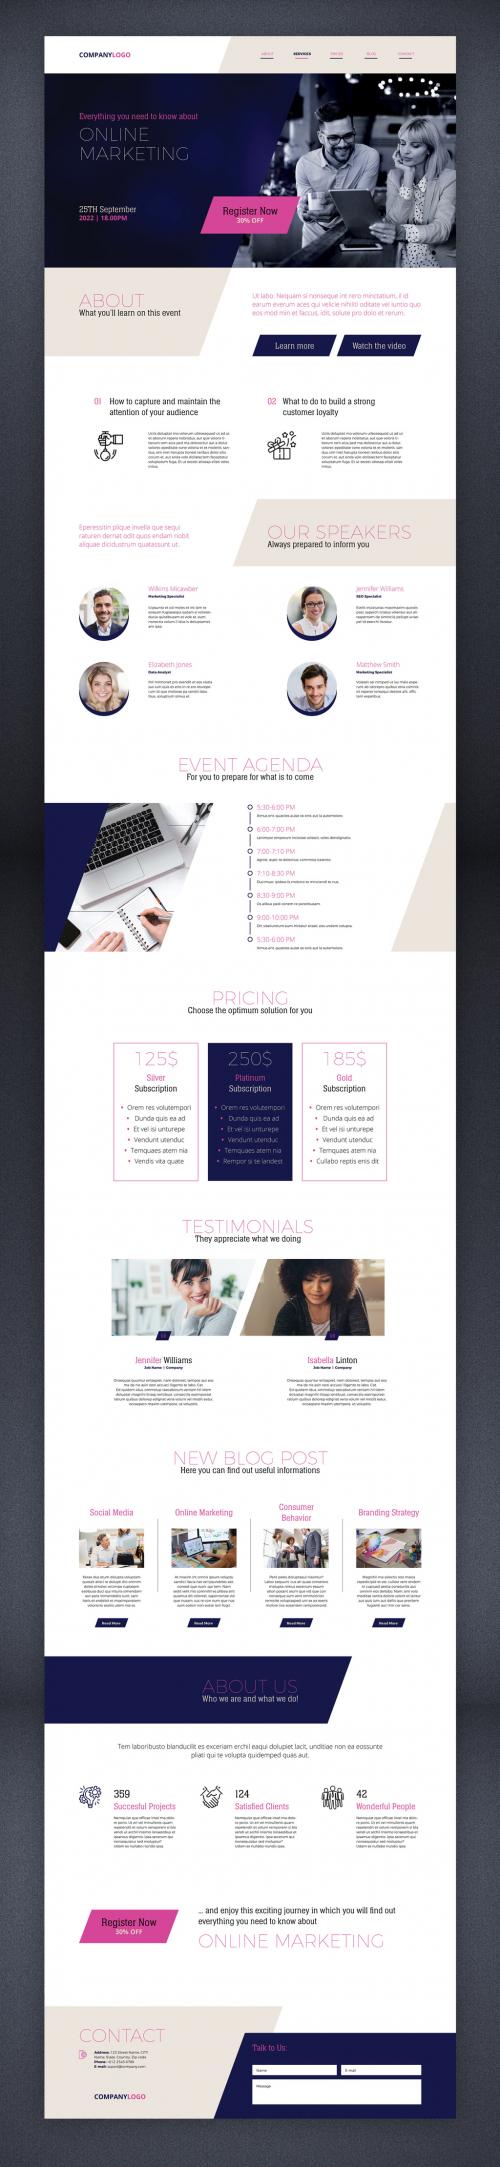 Adobe Stock - Online Event Landing Page with Blue and Pink Accents - 442558820